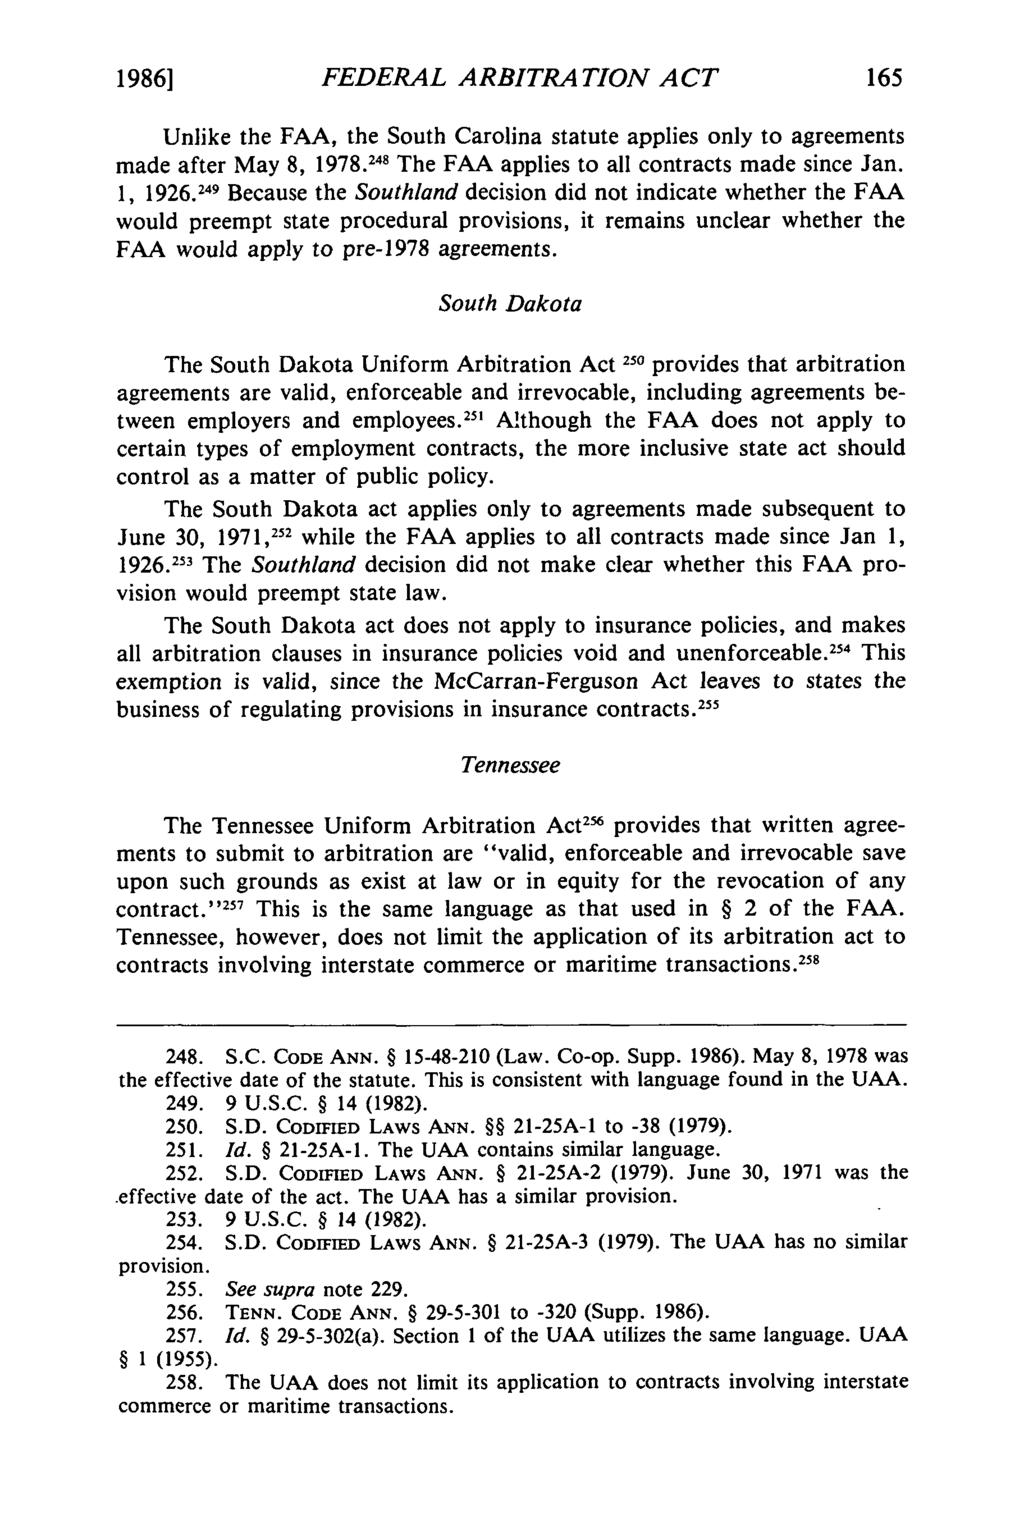 1986] et al.: Federal Arbitration Act Comparison FEDERAL ARBITRATION A CT Unlike the FAA, the South Carolina statute applies only to agreements made after May 8, 1978.